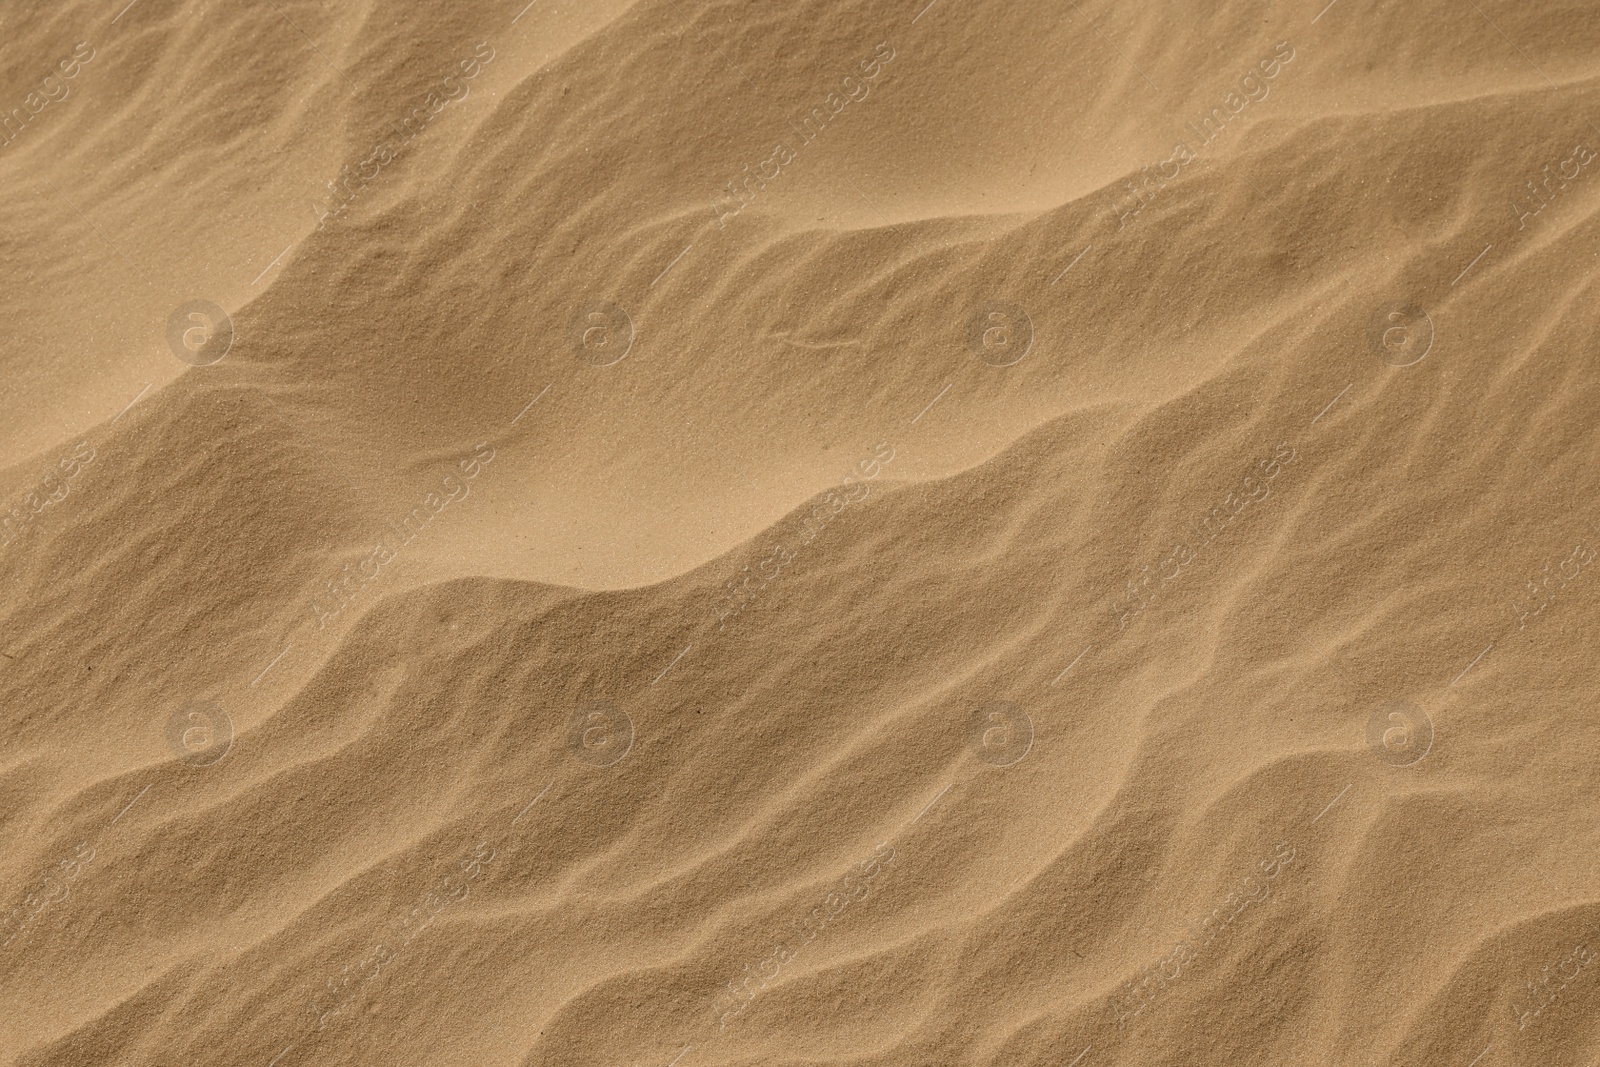 Photo of Closeup view of sand dune in desert as background